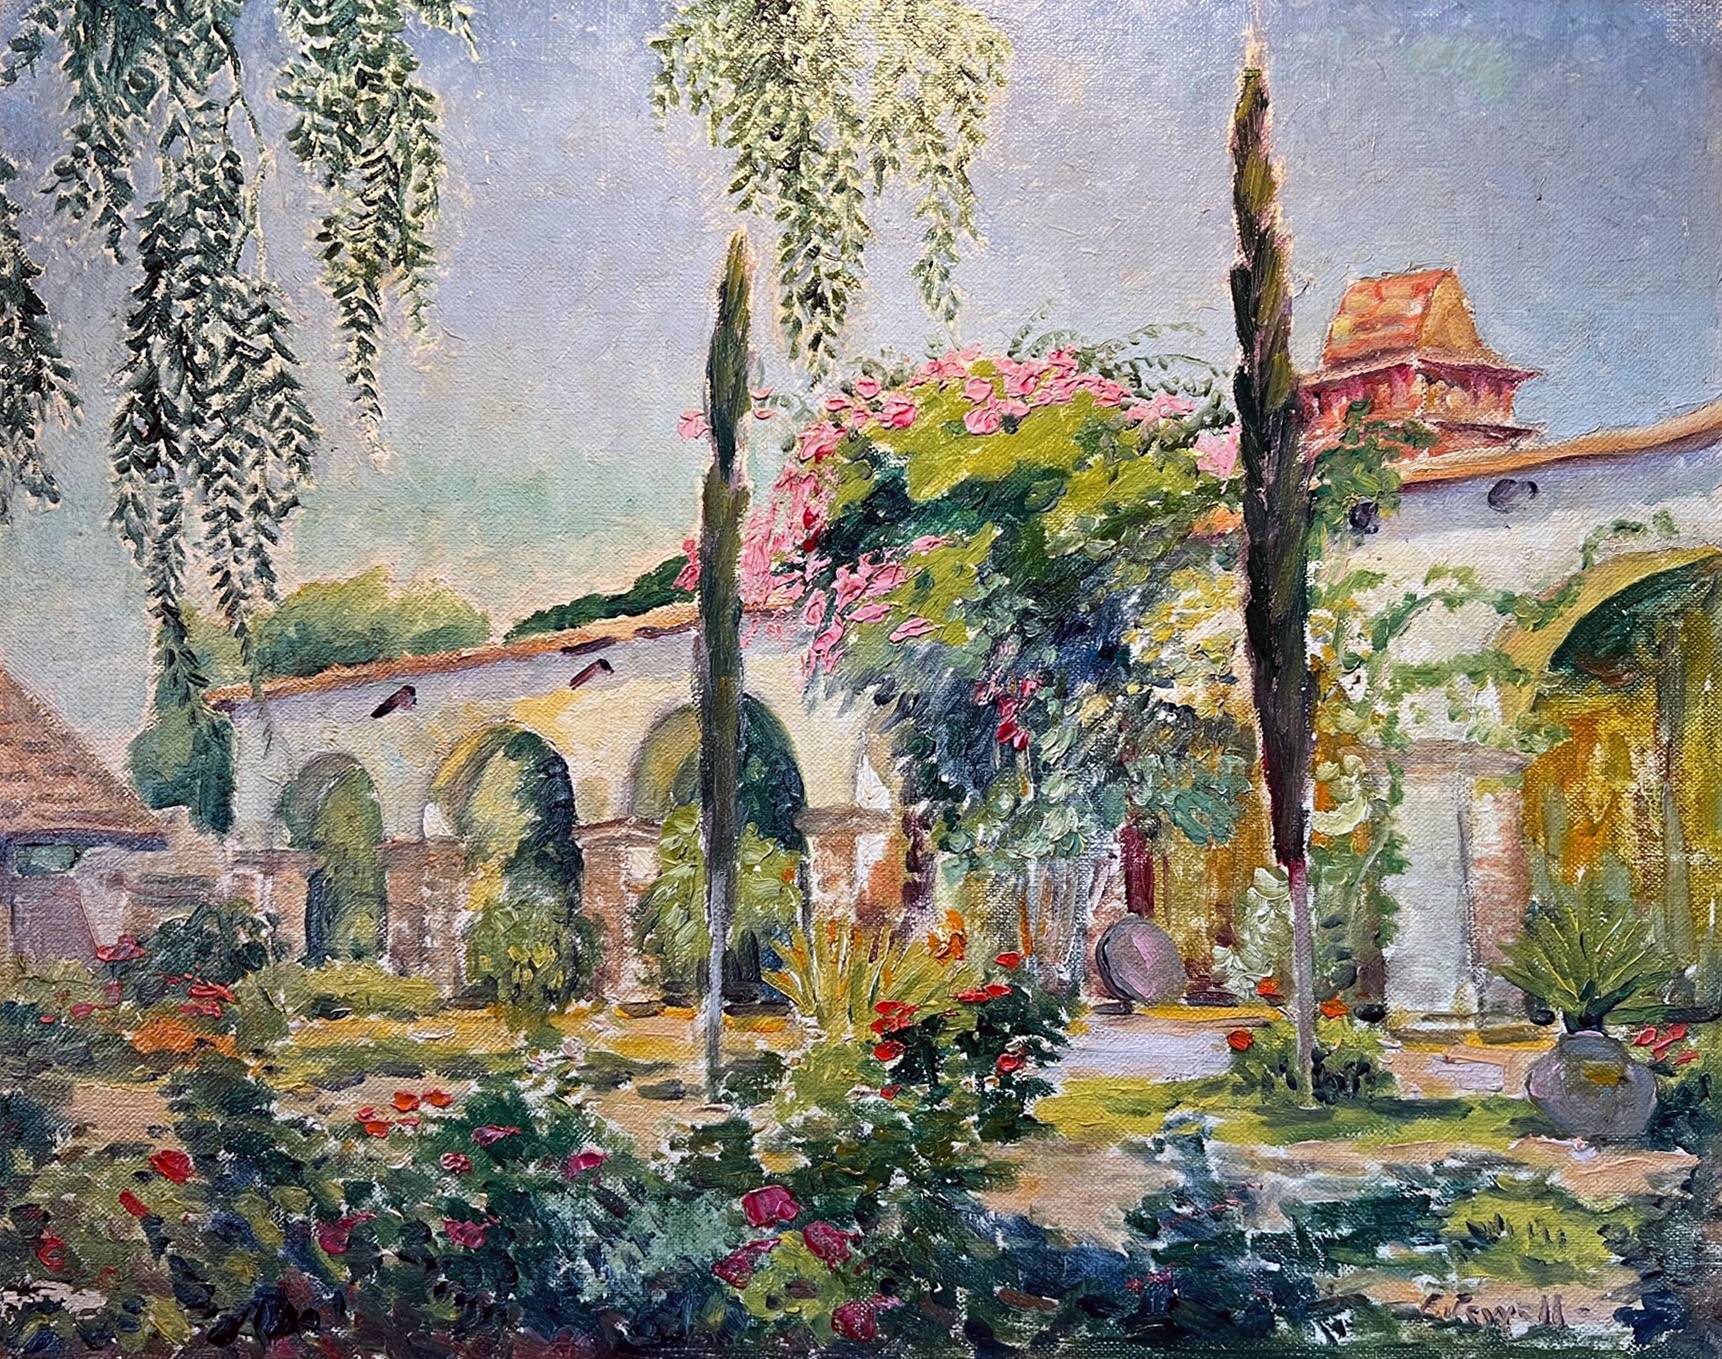 Mission San Juan Capistrano by Foster Jewell